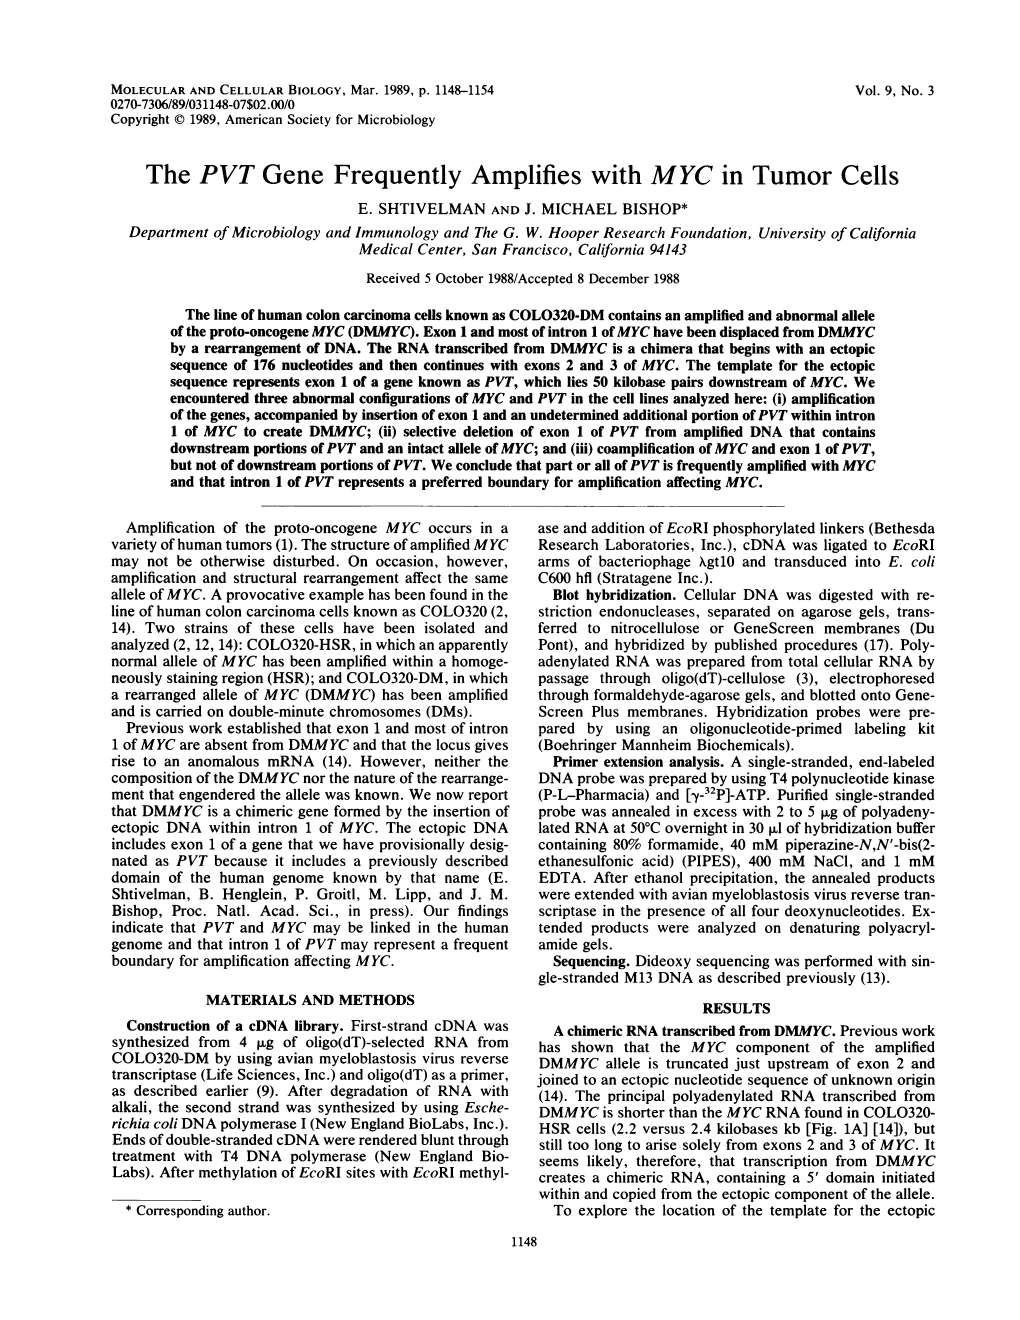 The PVT Gene Frequently Amplifies with MYC in Tumor Cells E